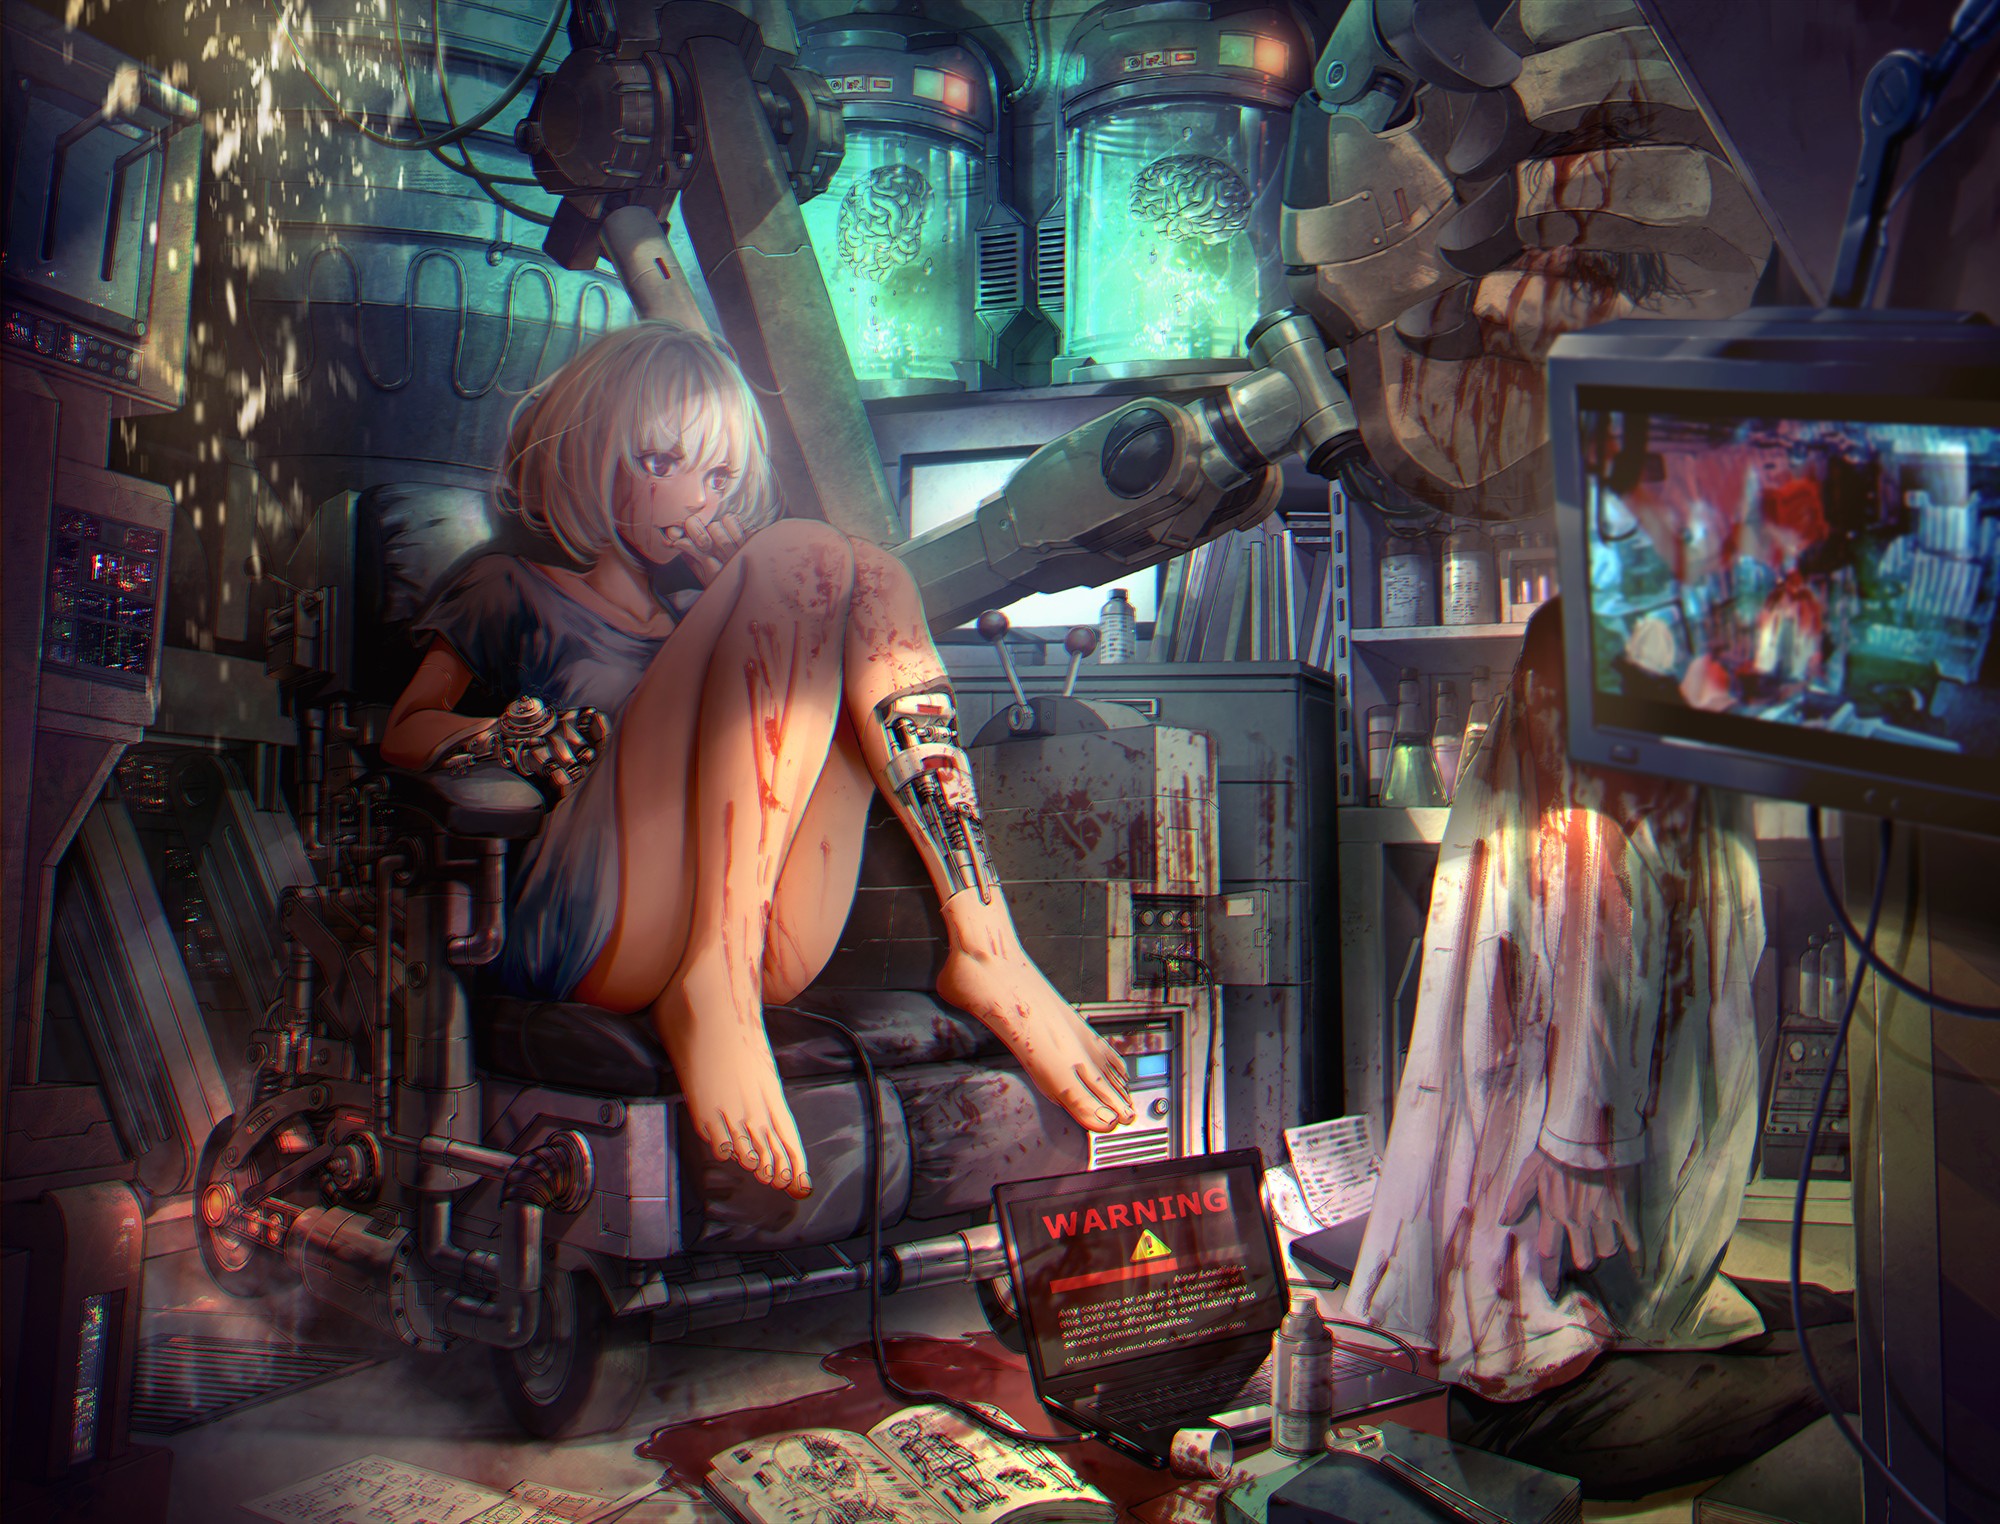 Anime 2000x1524 anime anime girls barefoot original characters mecha girls laboratories cyborg science fiction blood Pixiv knees together women indoors indoors thighs legs blonde monitor technology futuristic women